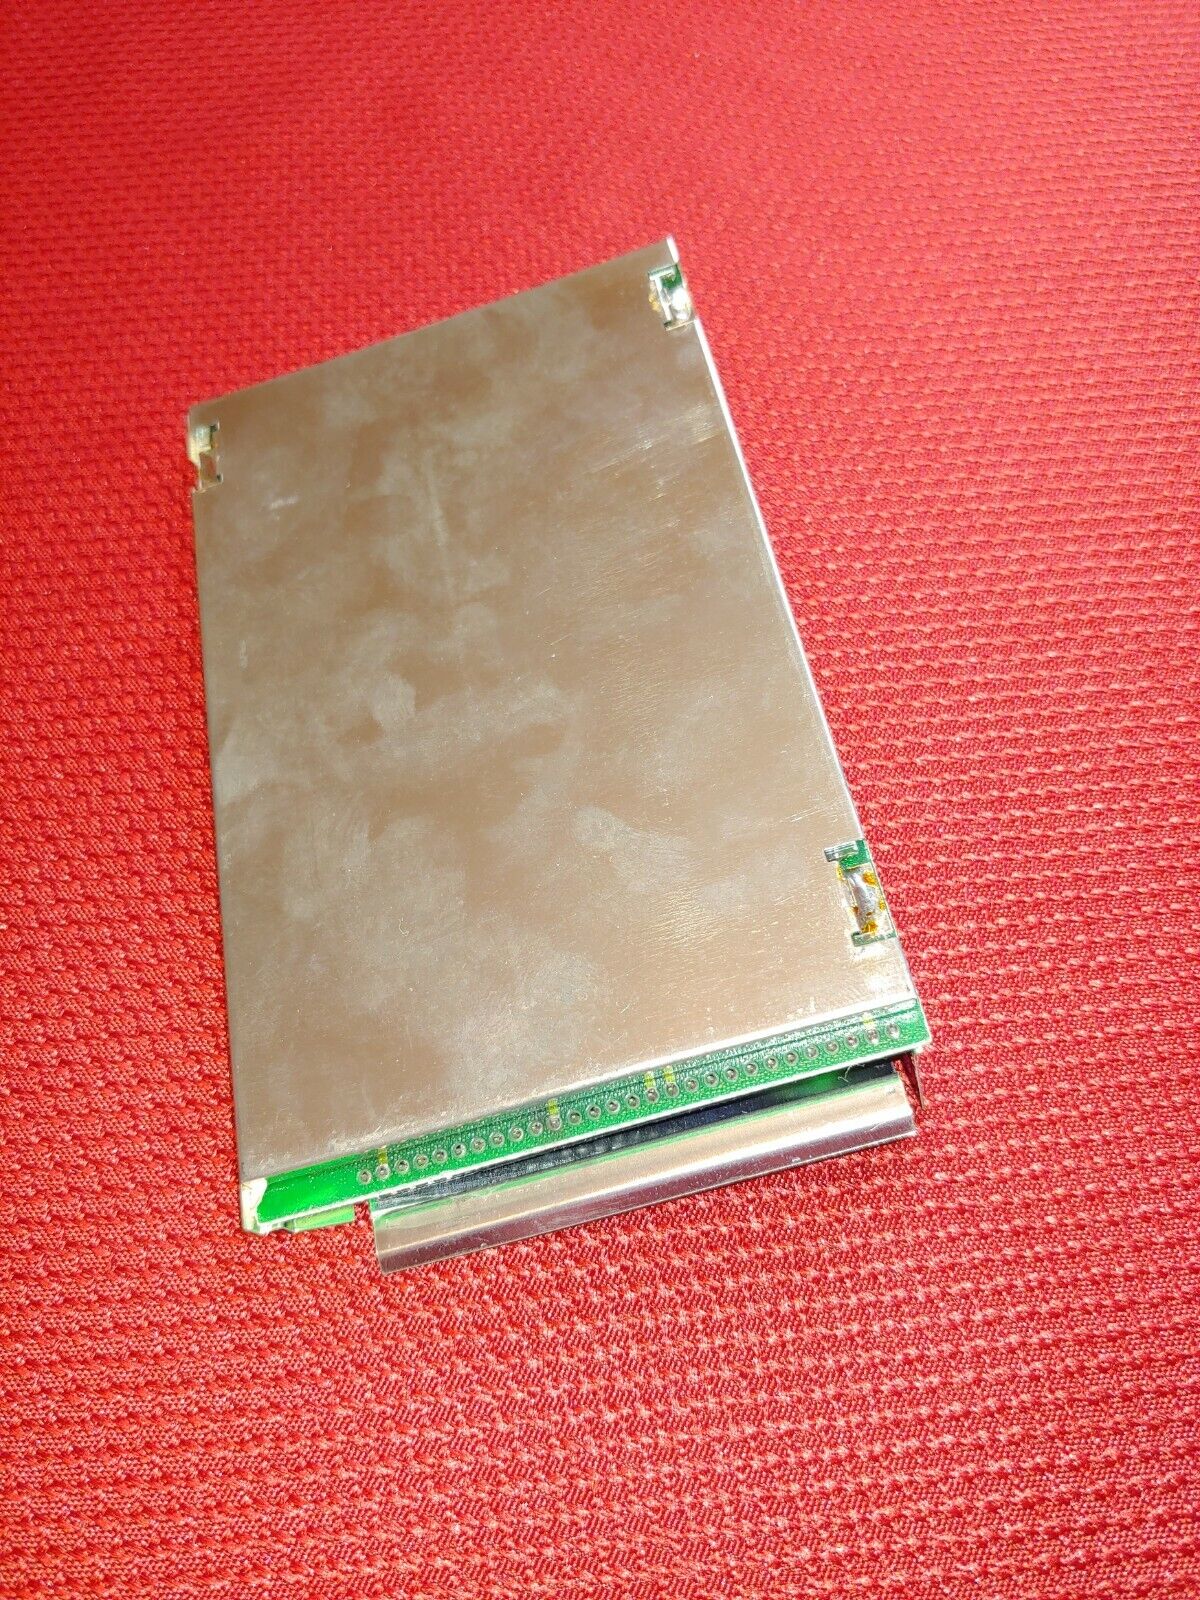 Commodore Amiga 500 512KB Ram Expansion , Tested ,Works , SOLD AS IS DUE TO AGE 